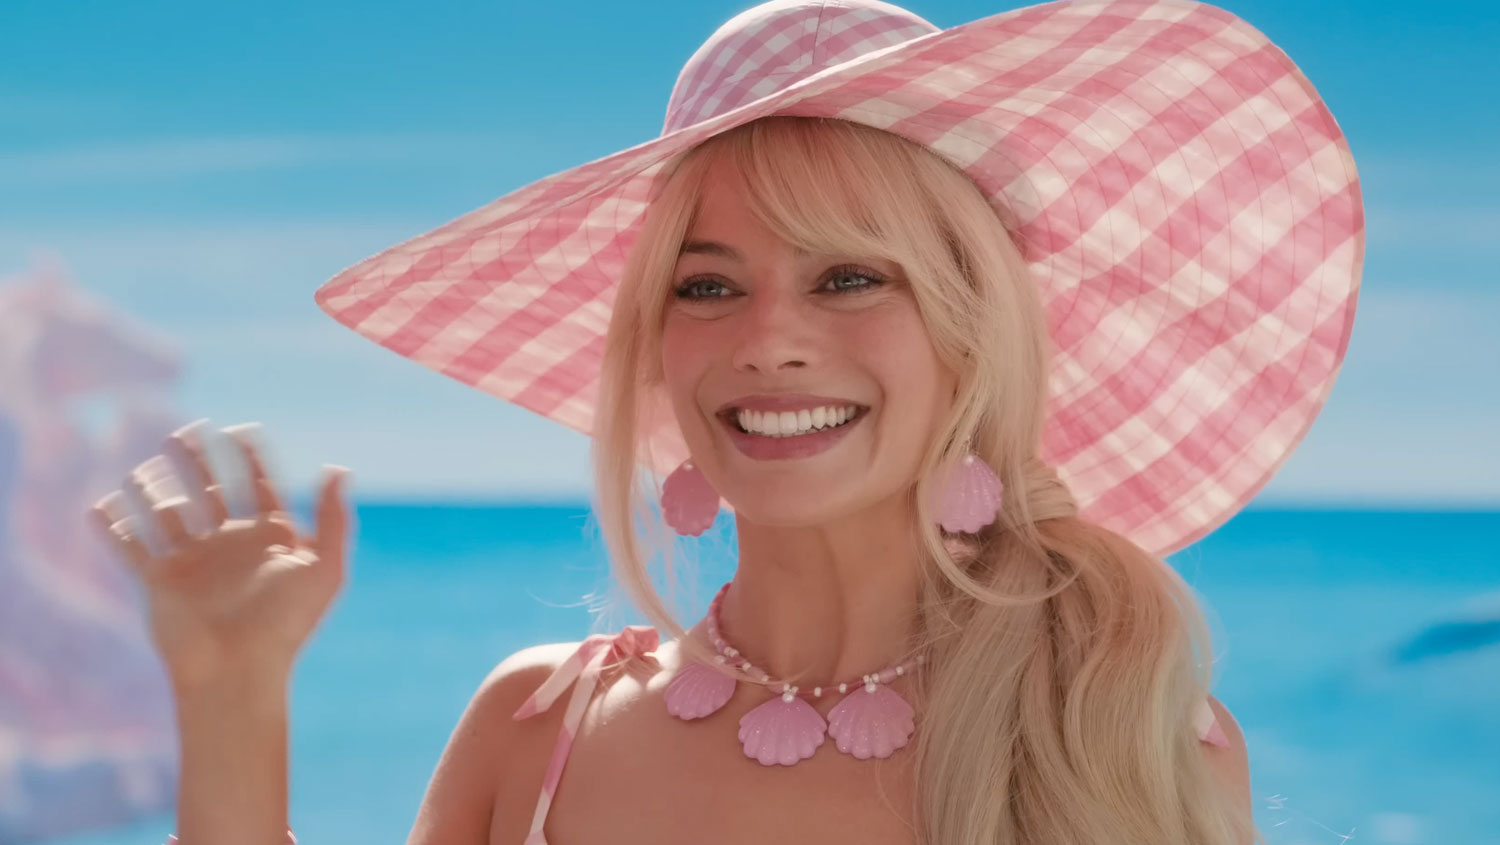 Margot Robbie On The Sexualization Of Barbie & Why She Wanted To Cast Gal Gadot